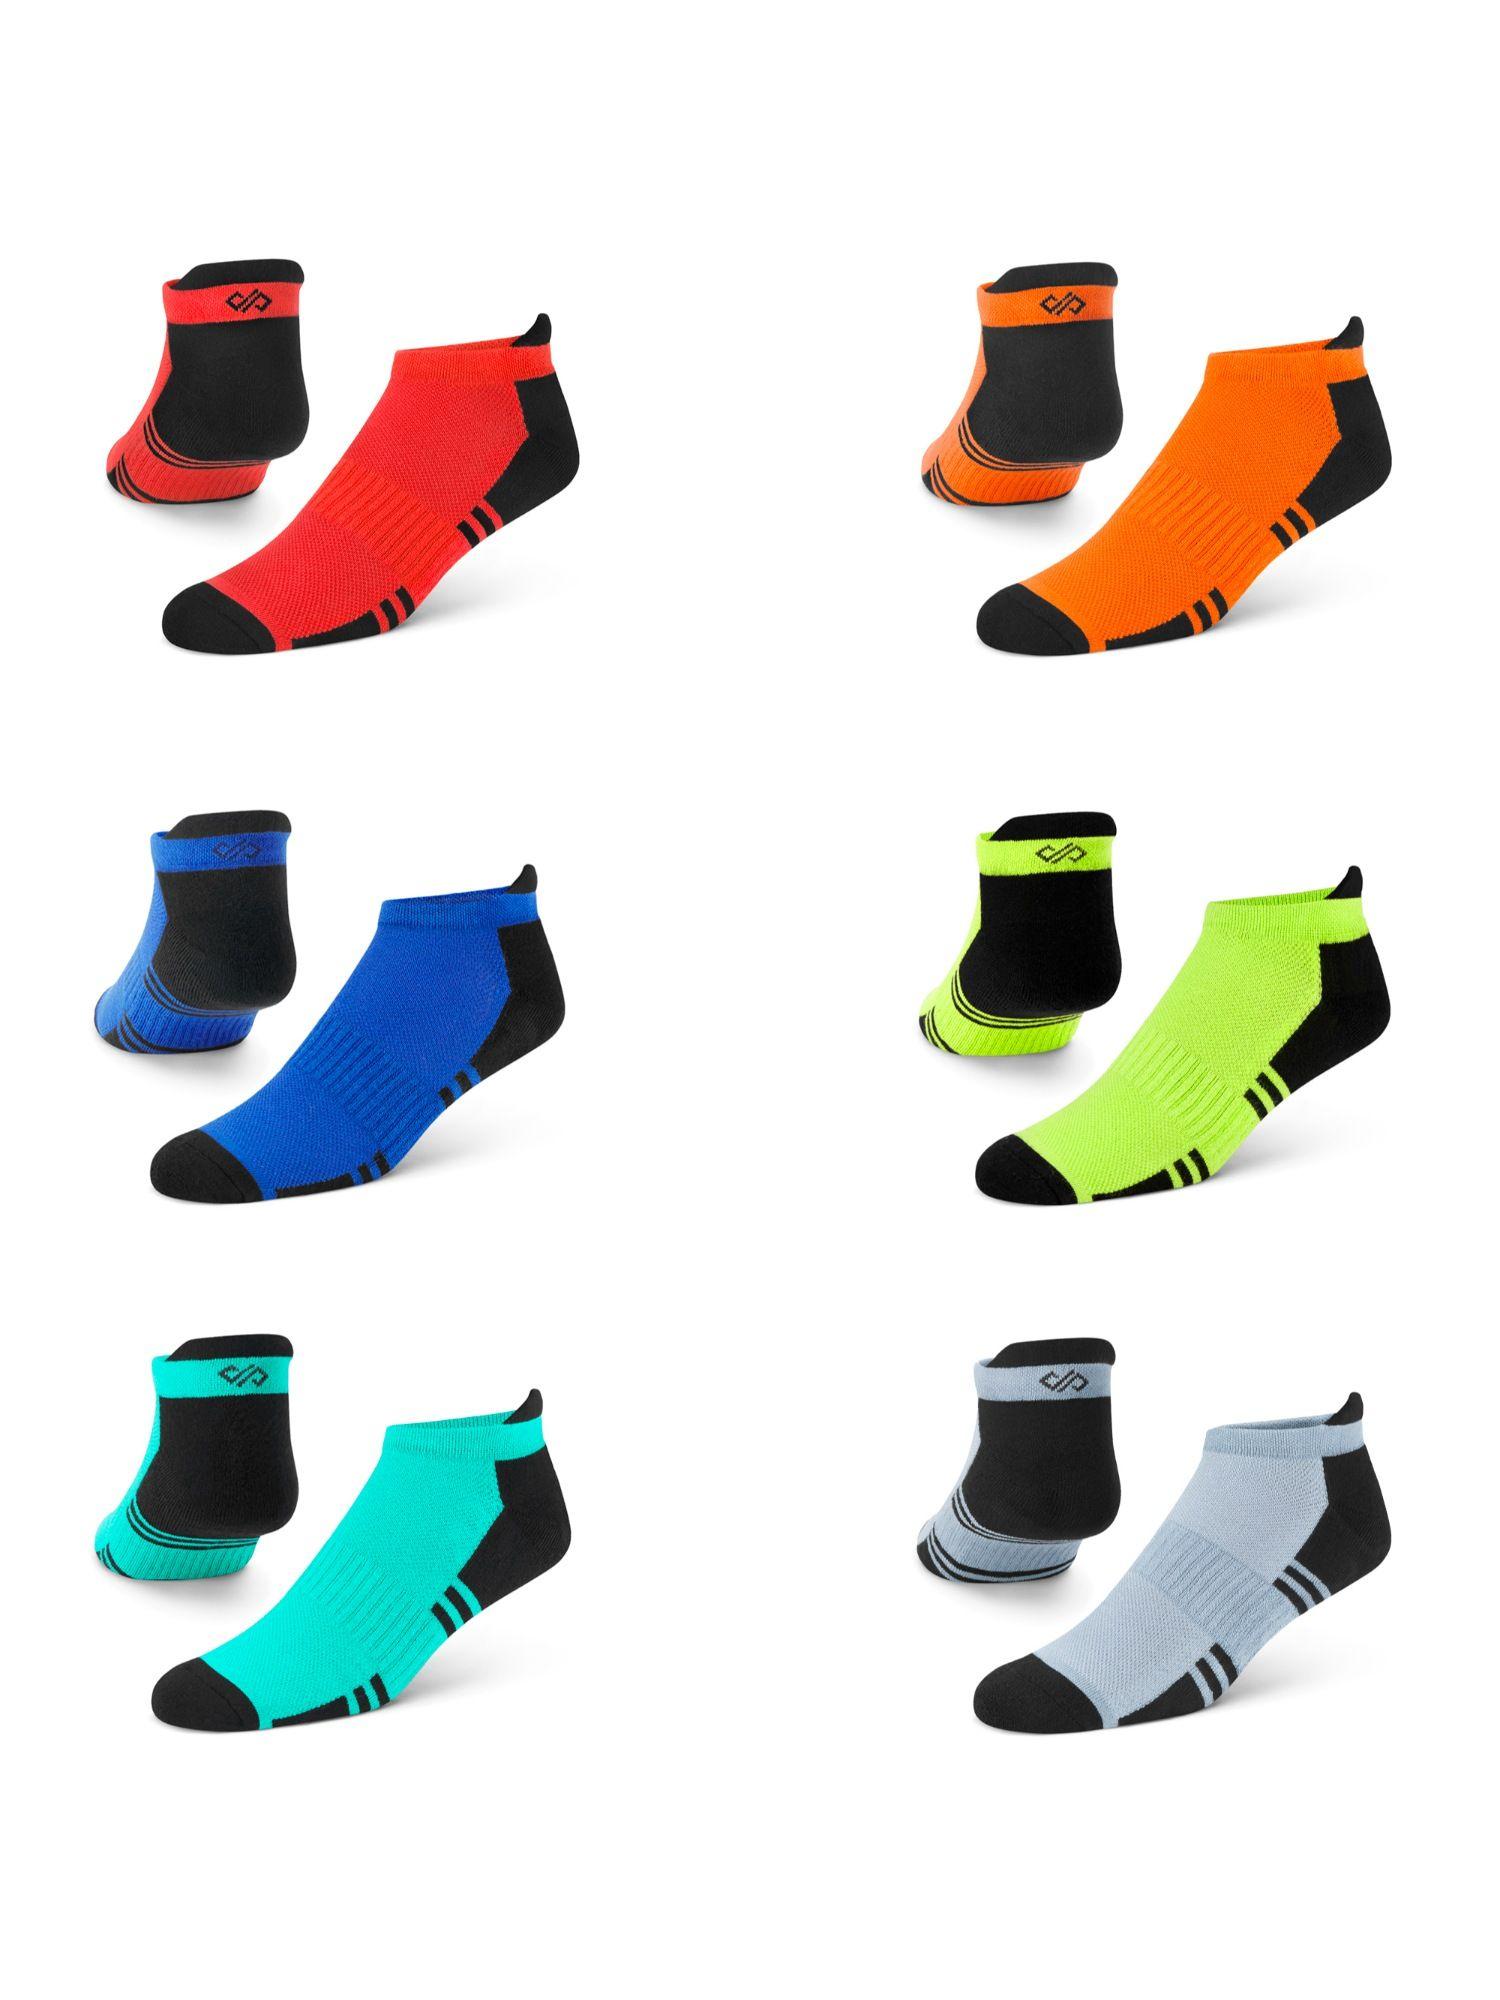 dual solid multicolor men bamboo ankle length socks - free size - pack of 6 pairs